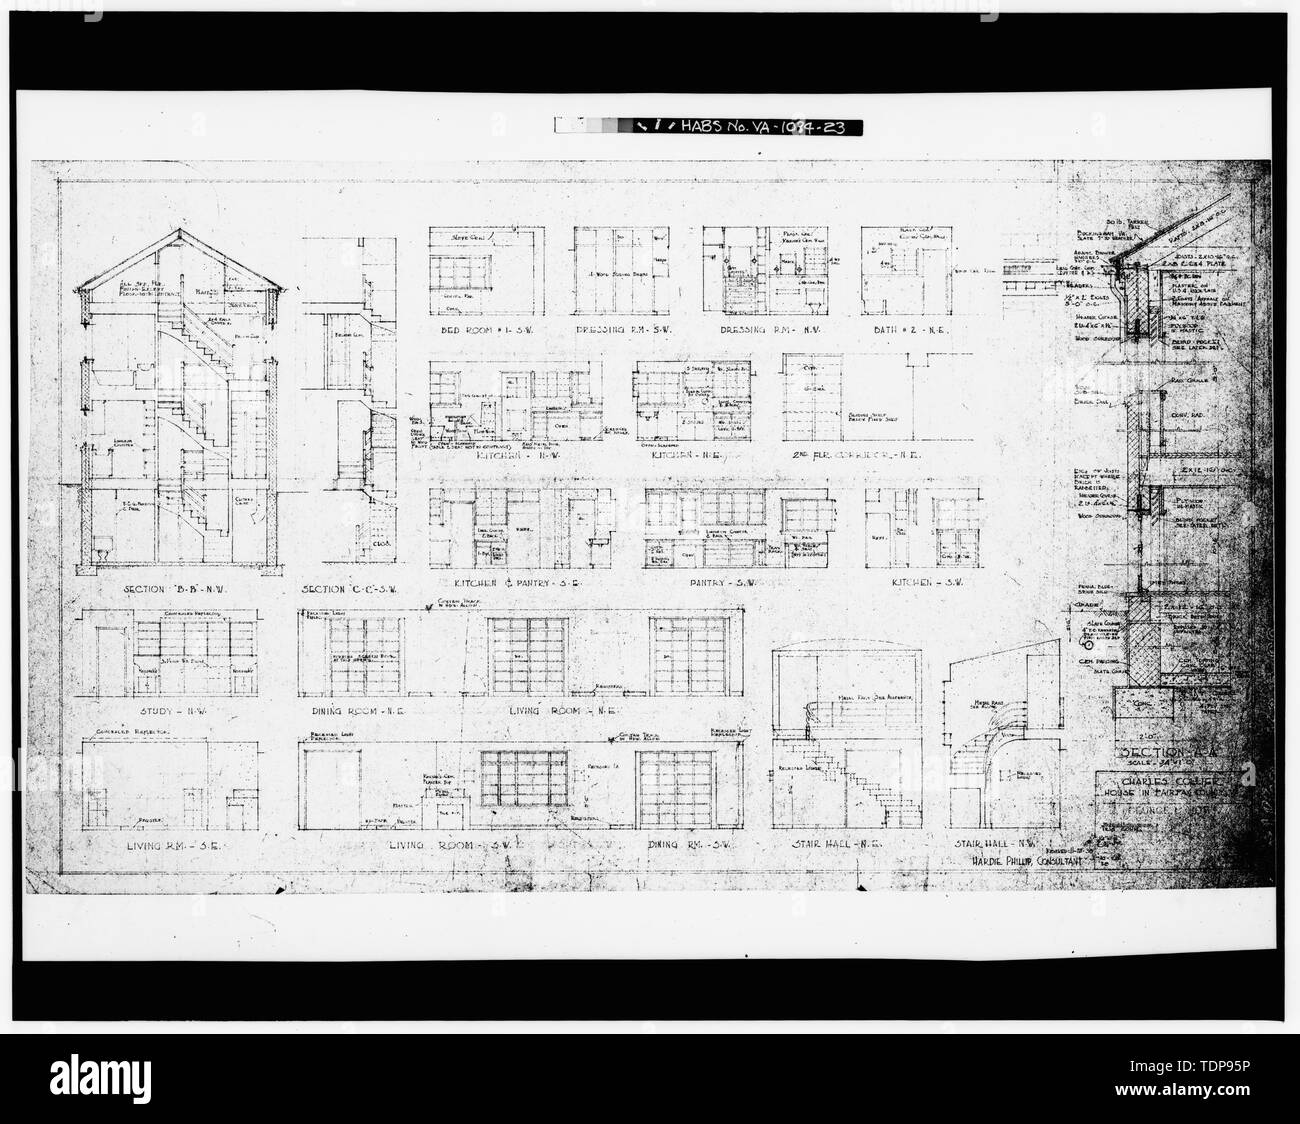 Photocopy of blackline print in possession of Mrs. William L. Reno. Original drawing by George Locke Howe, Architect 1938. SHEET OF SECTIONS AND ROOM ELEVATIONS - Mr. and Mrs. Charles Collier House, 6080 Leesburg Pike, Falls Church, Falls Church, VA; Howe, George Locke; Keily, Dan; Morris, Scott, transmitter Stock Photo